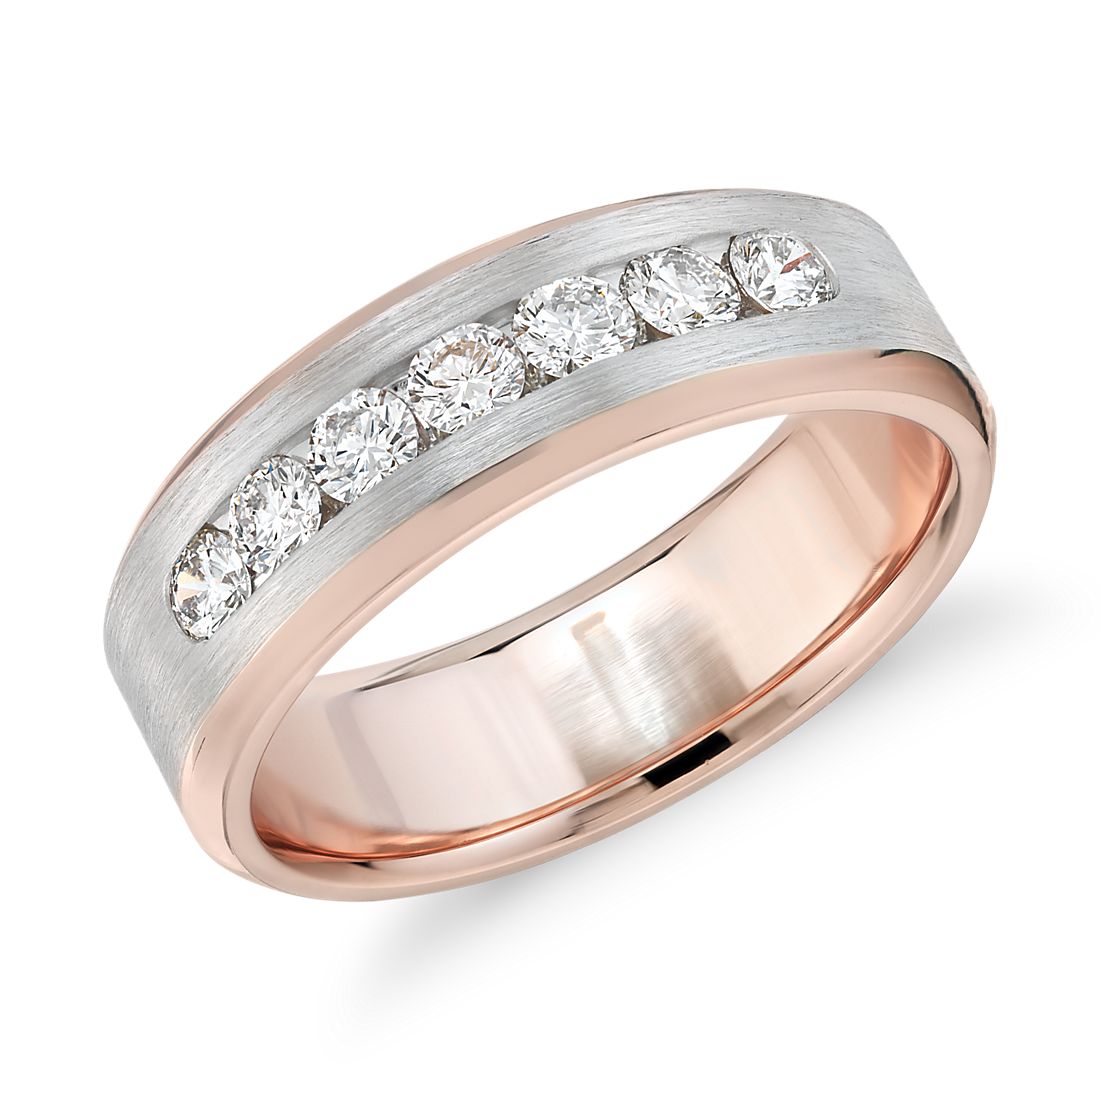 Details about   Pink Two-Tone 10k White Gold 0.11 Ct Diamond Swril Fashion Ring